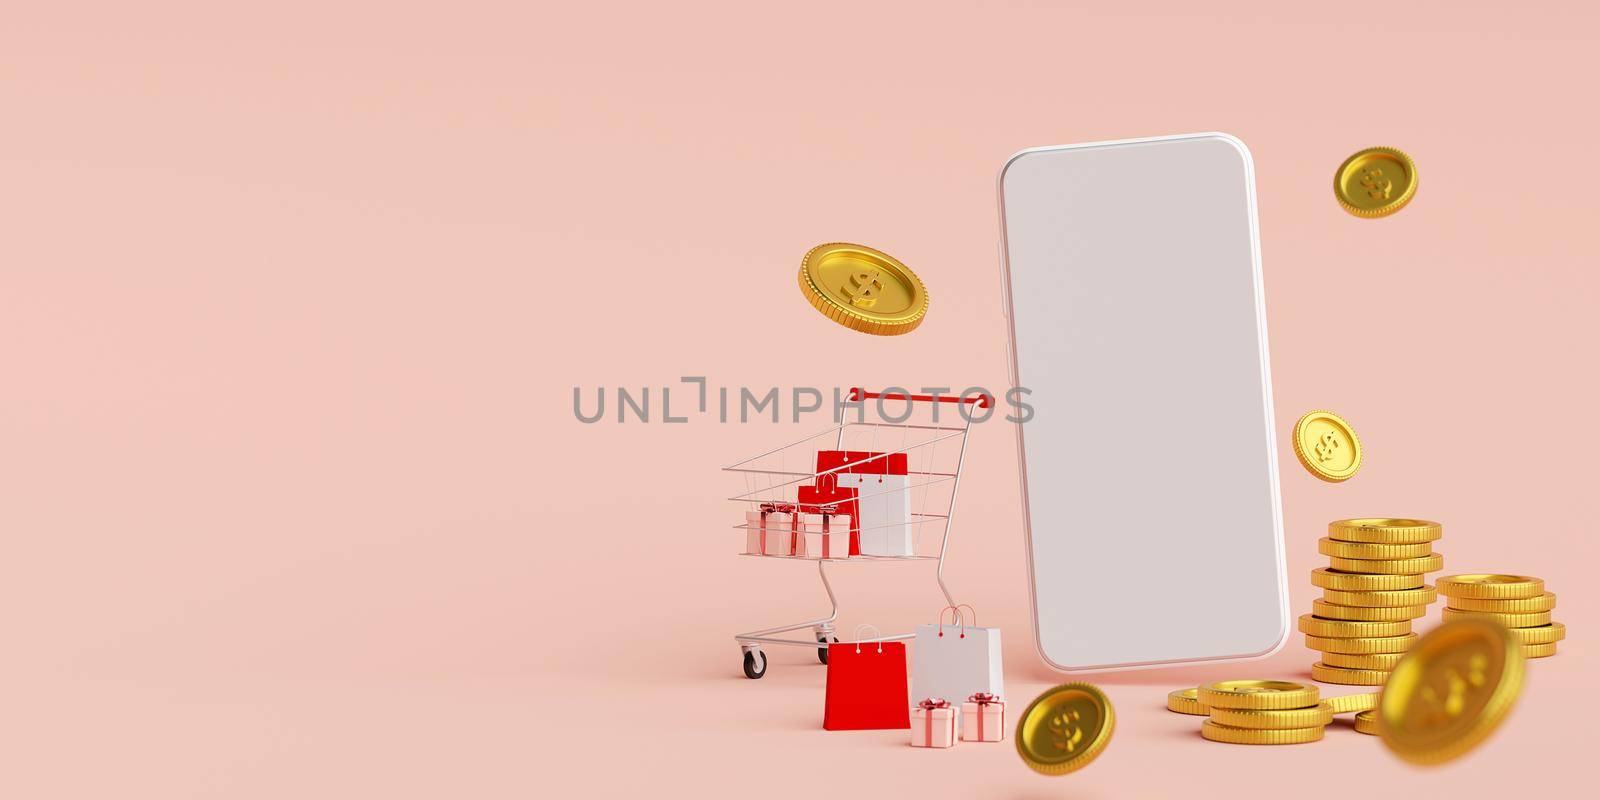 Scene of smartphone with shopping cart and golden coin, Banner background, 3d rendering